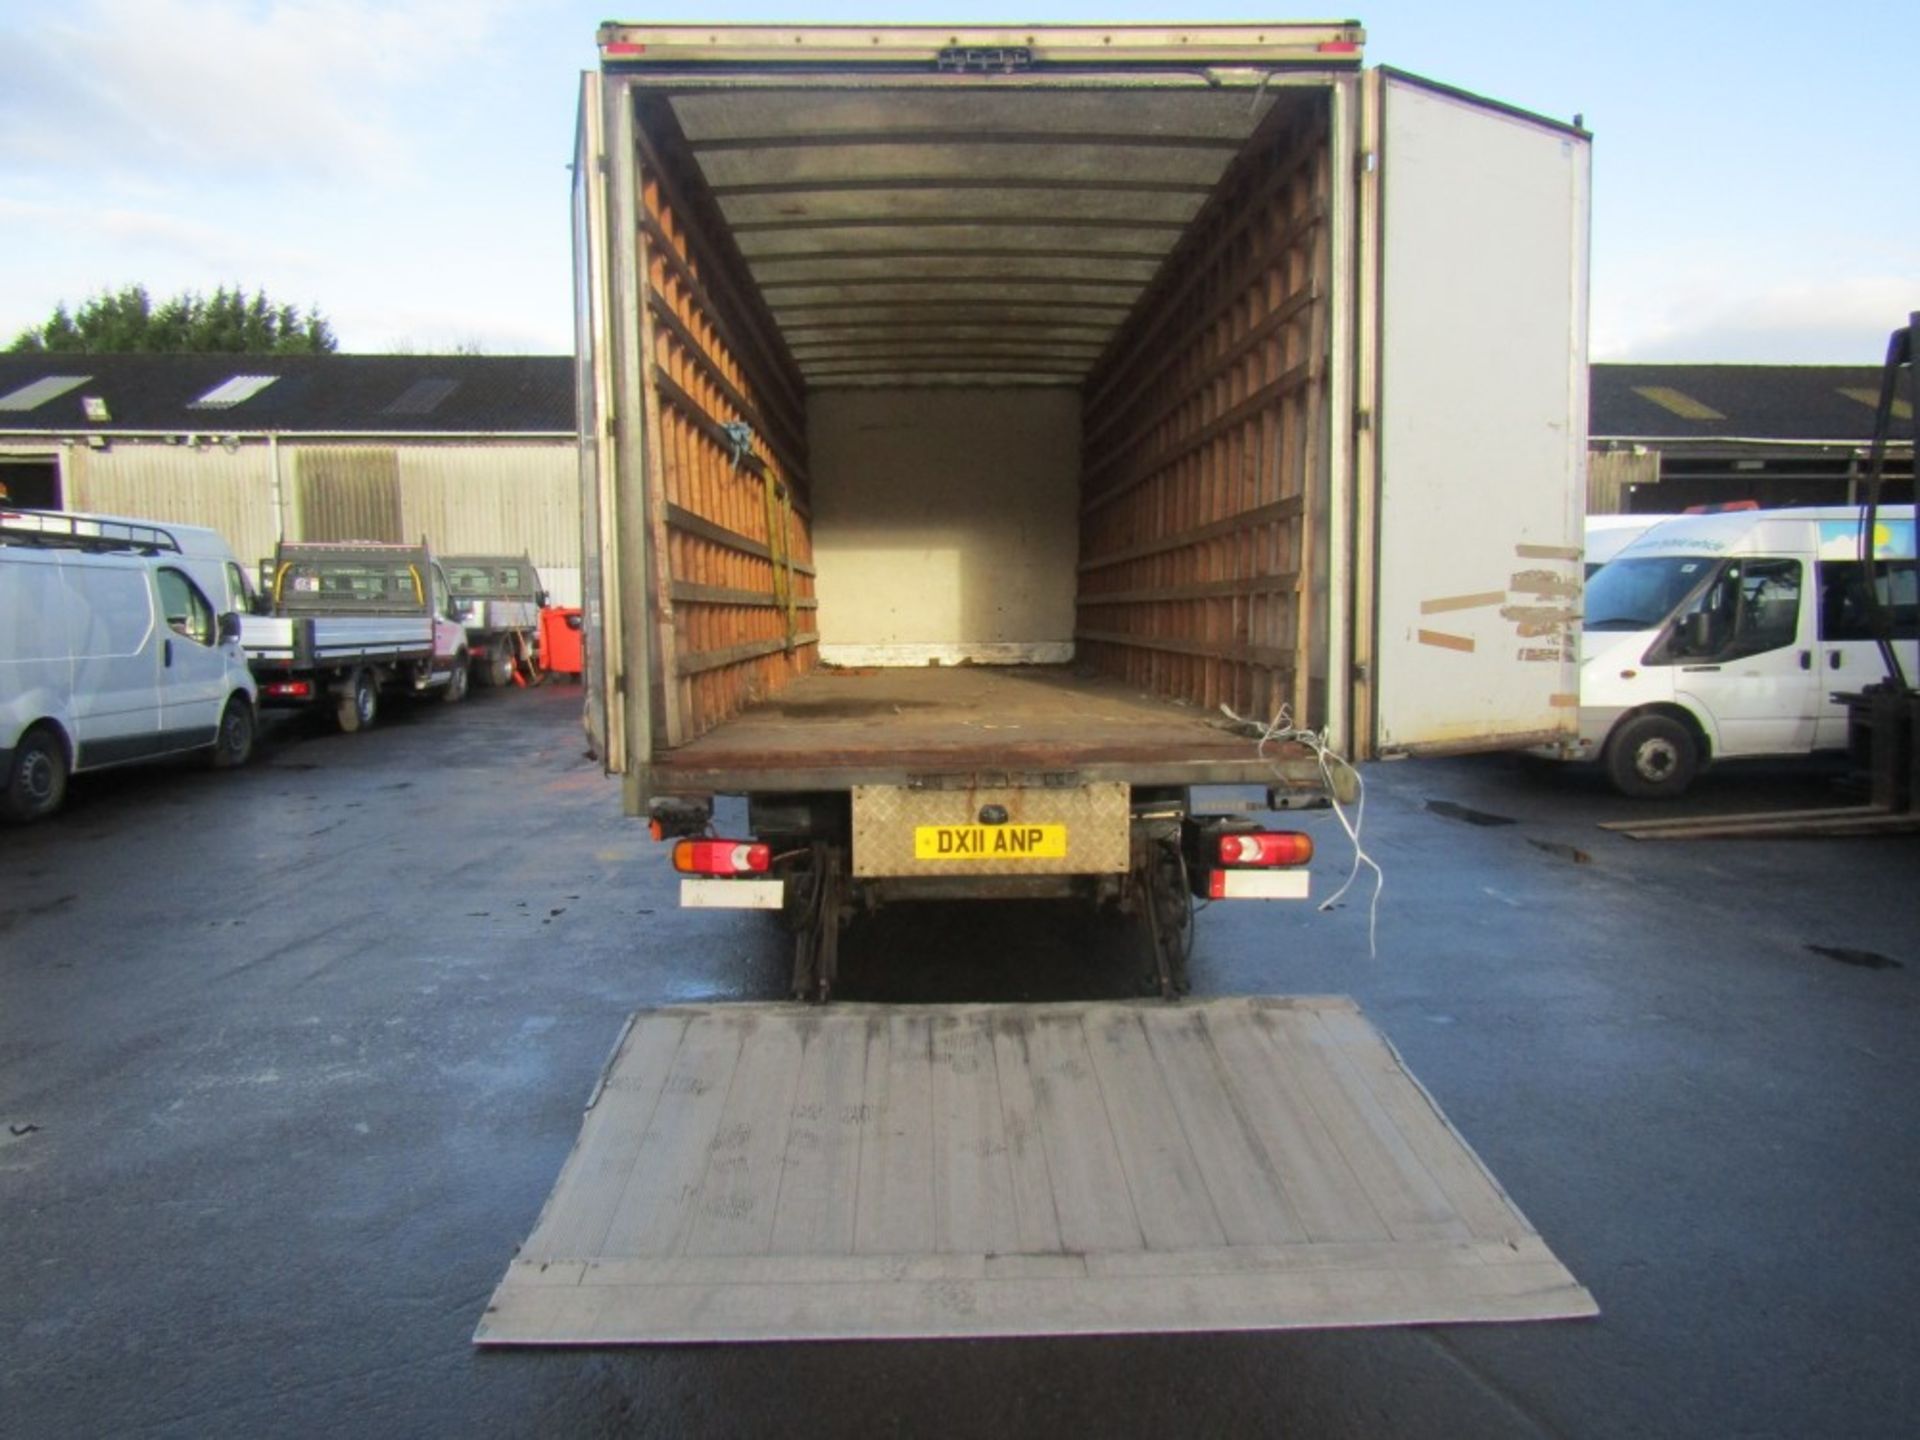 11 reg DAF FA LF45.160 BOX VAN C/W TAIL LIFT, 1ST REG 05/11, 658225KM, V5 HERE, 1 FORMER KEEPER [+ - Image 5 of 7